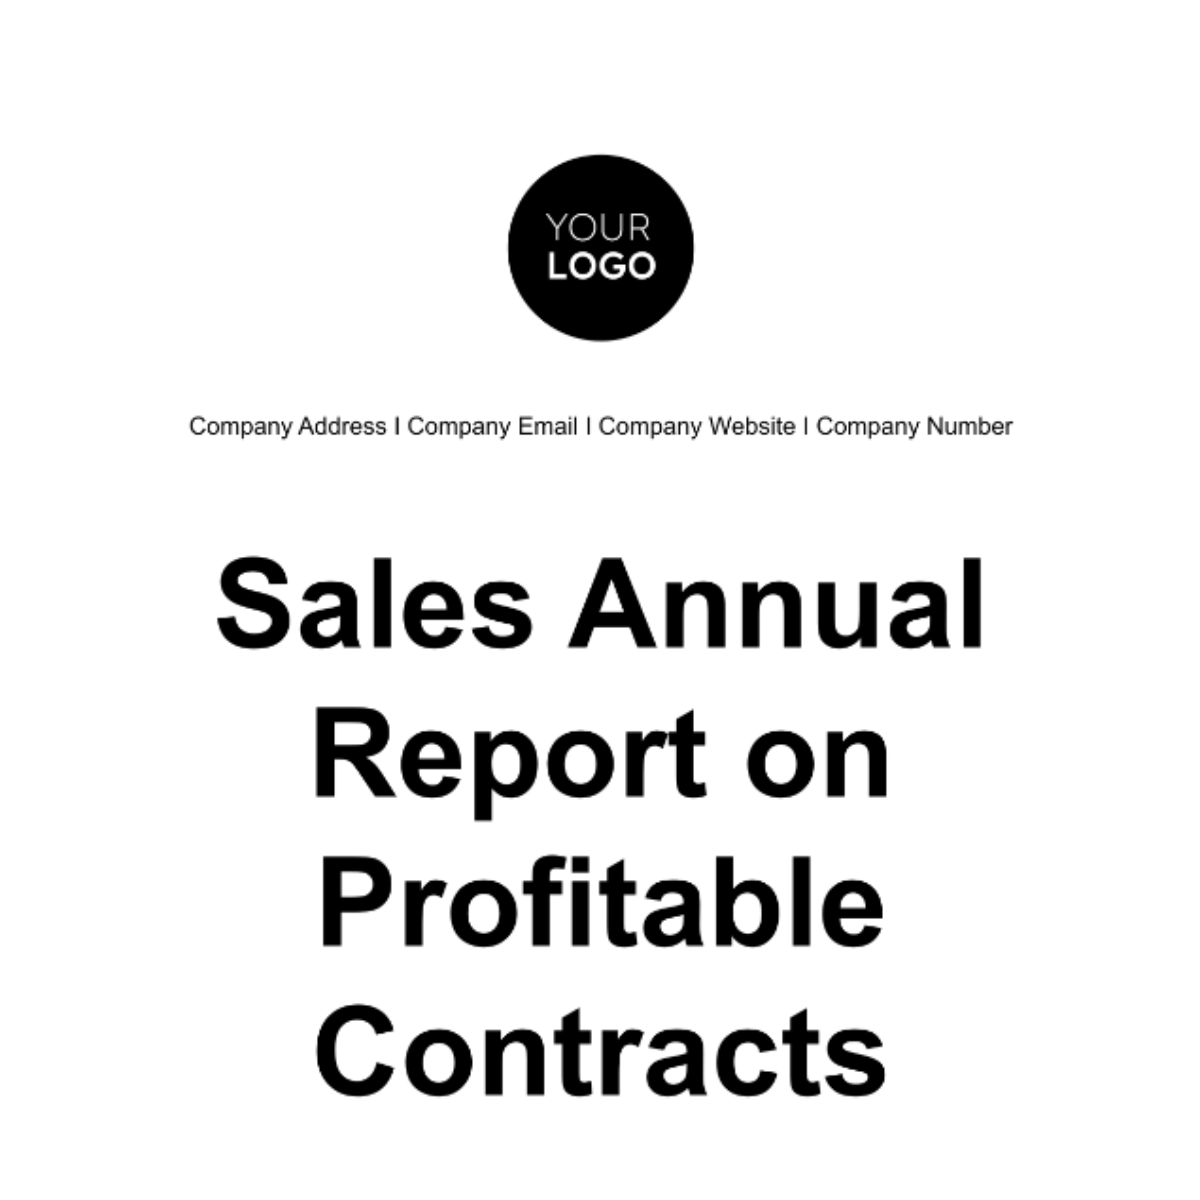 Free Sales Annual Report on Profitable Contracts Template